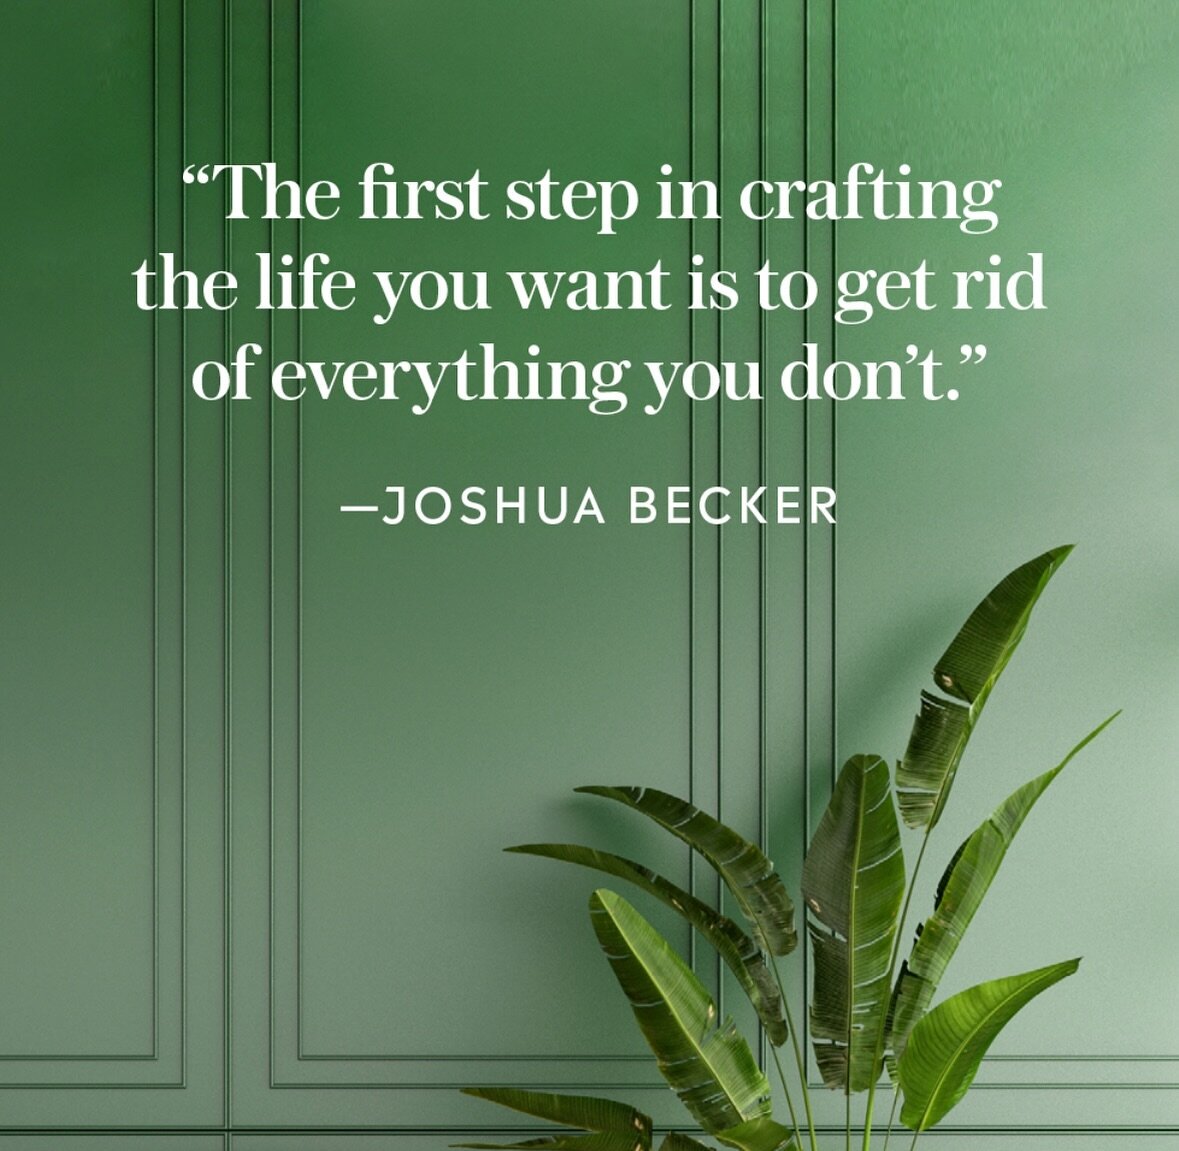 So much truth in this quote from Joshua Becker. Simplifying the items you own is the first step in creating that peace-giving life you&rsquo;re looking for. Don&rsquo;t know where to begin? Start with the easy. Search your home for &hellip;

&bull; A